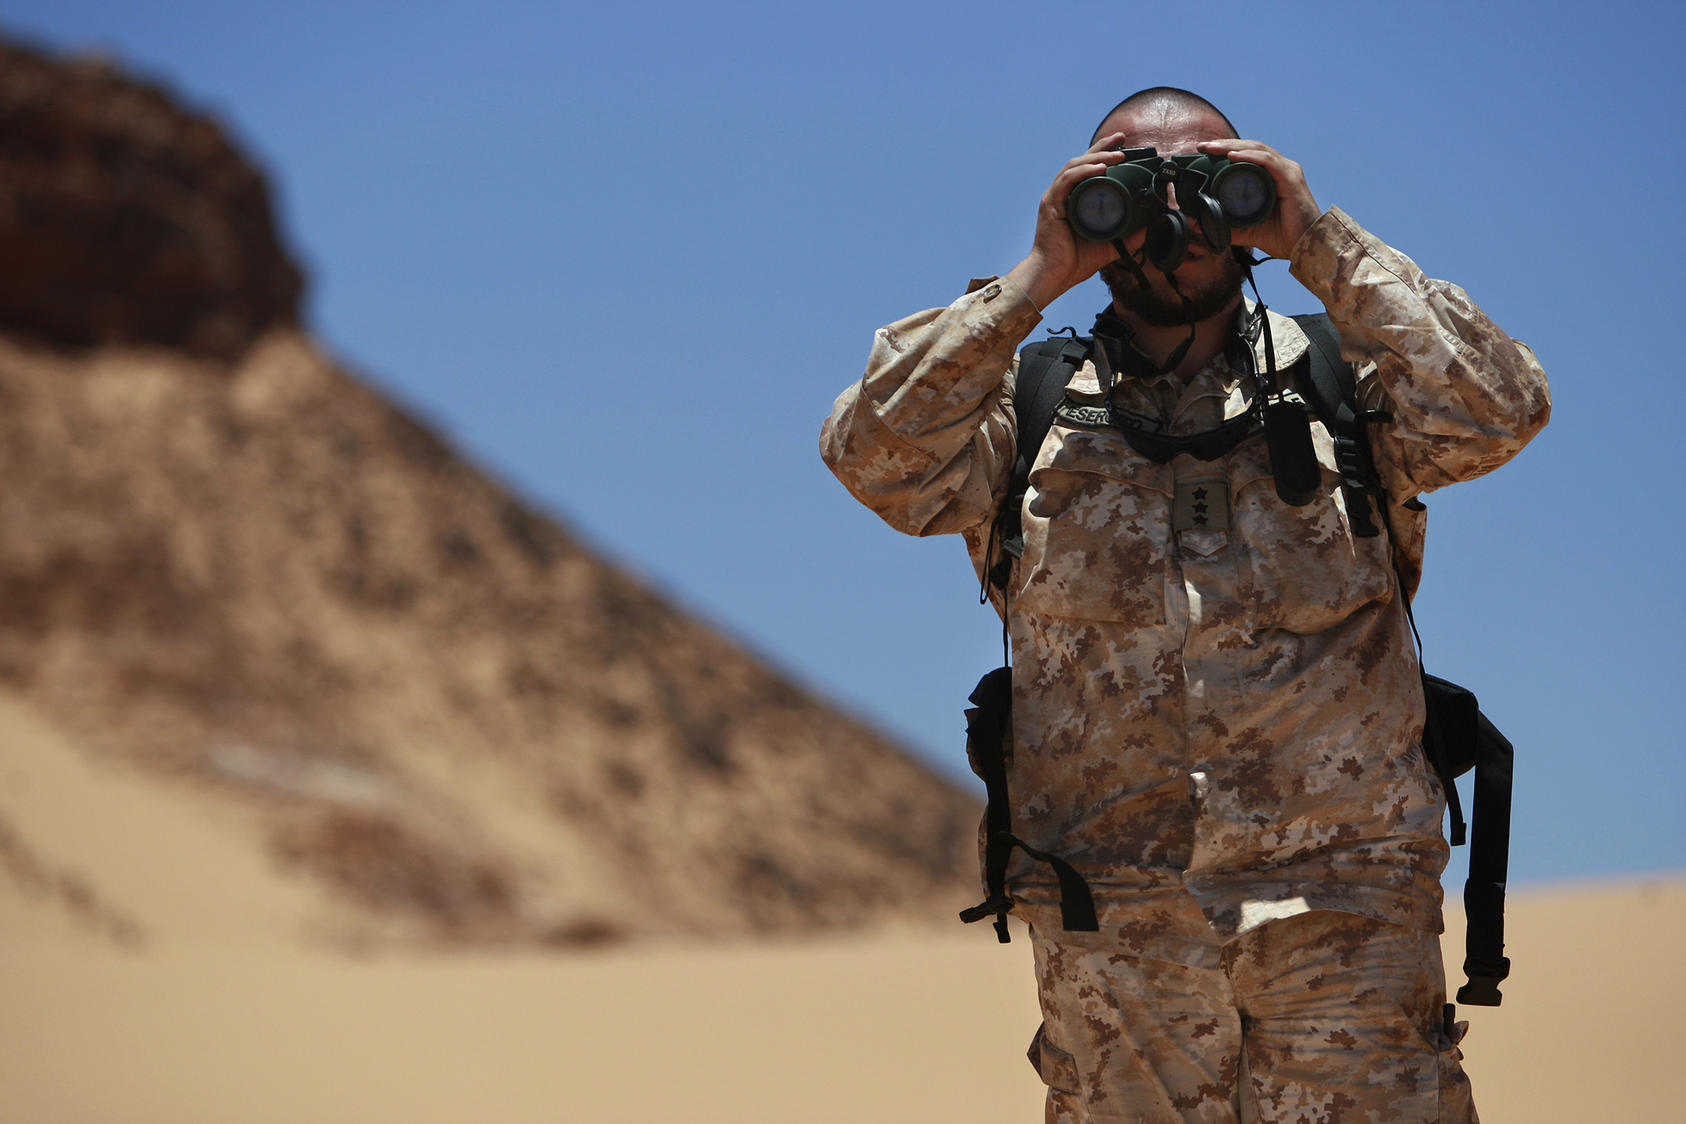 Antonio Achille, working with the Military Liaison Office of the U.N. Mission for the Referendum in Western Sahara, looks through binoculars during a cease-fire monitoring patrol in Oum Dreyga, Western Sahara. (United Nations Photo)